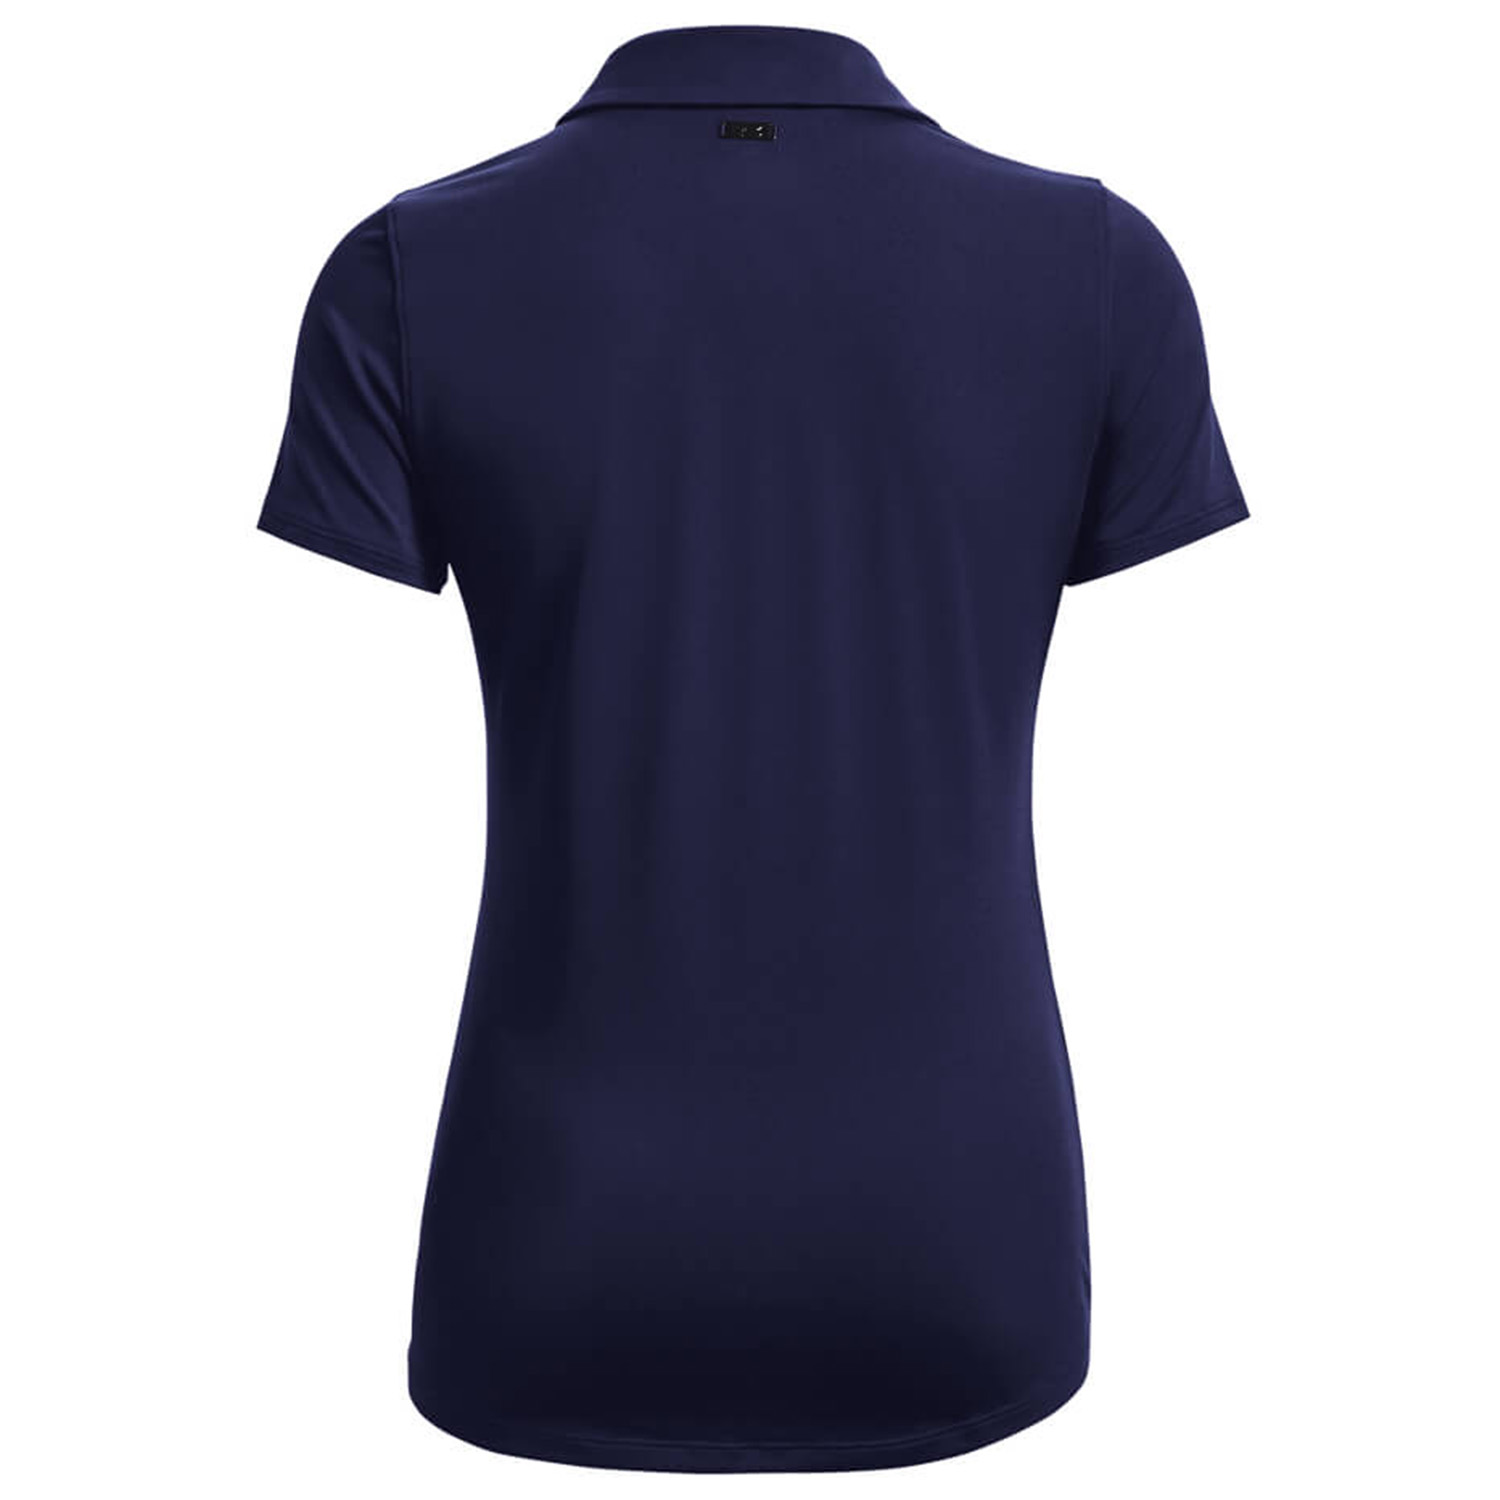 Under Armour Zinger Ladies Golf Polo Shirt